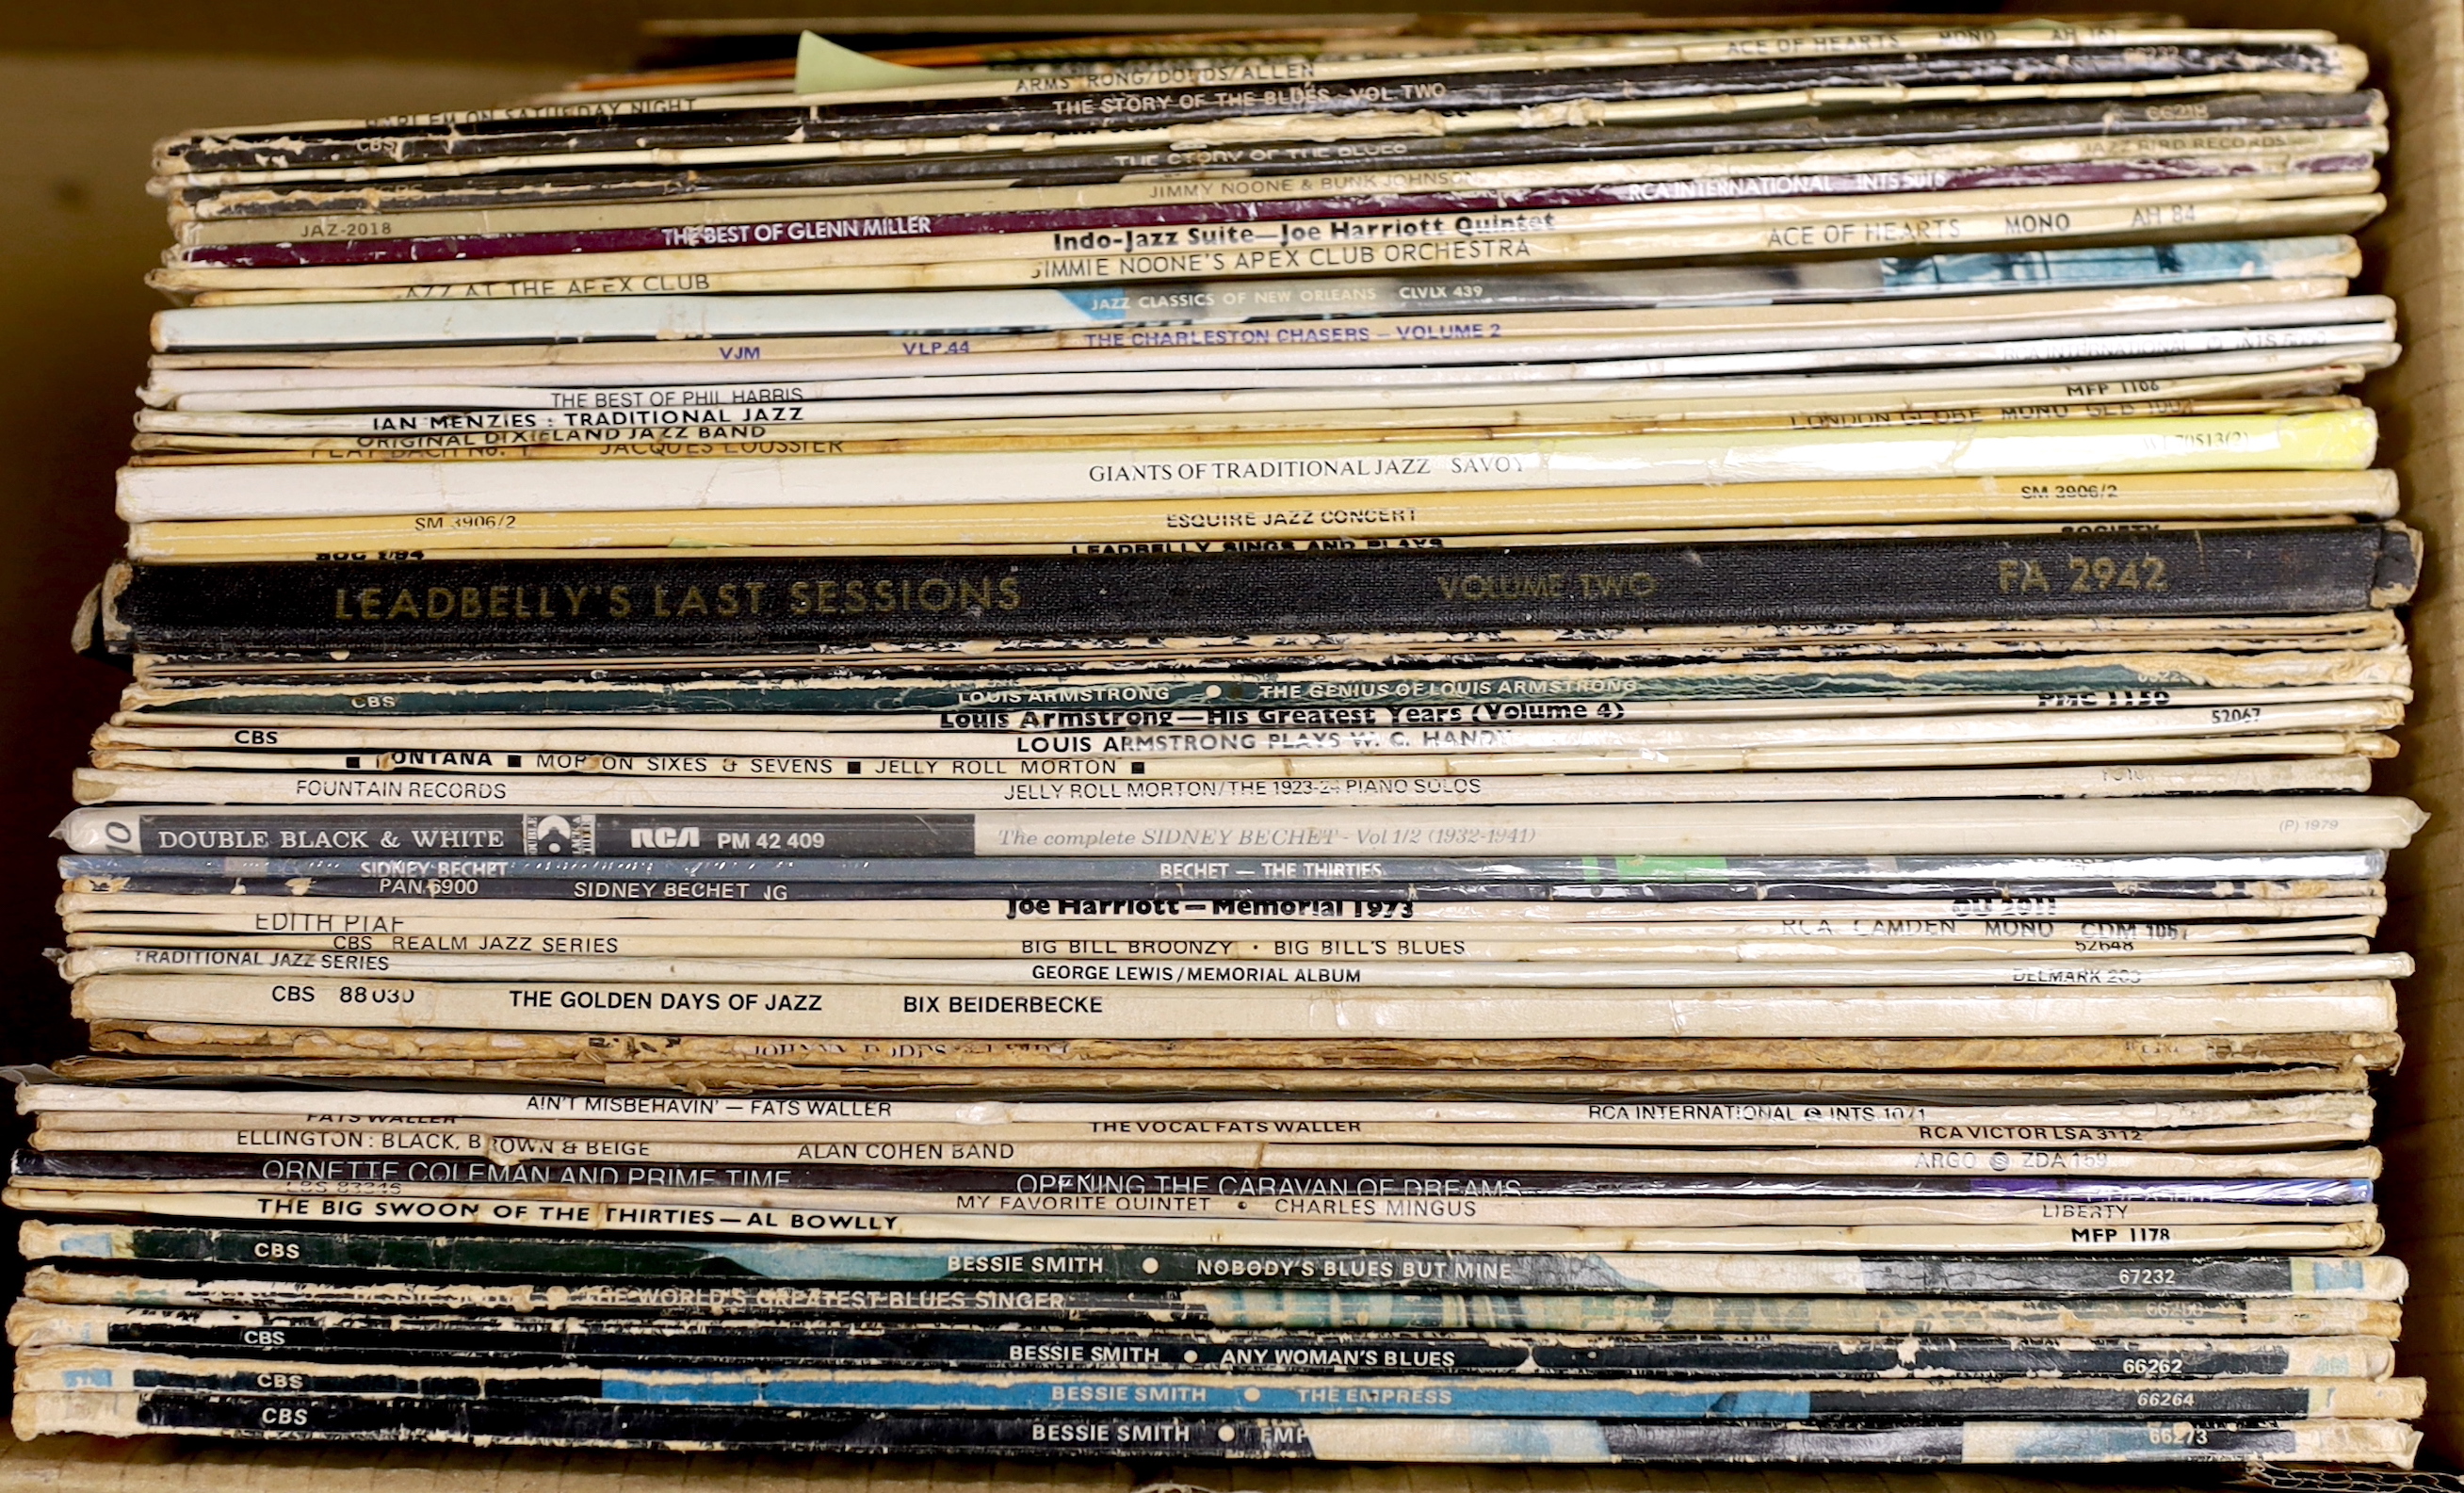 Forty-six Jazz LPs including, Bessie Smith, Charlie, Mingus, Ornette Coleman, Fats Waller, Bix Beiderbecke, Jelly Roll Morton, Louis Armstrong, Leadbelly, Ian Menzies, etc. together with six 10 inch LPs, etc.